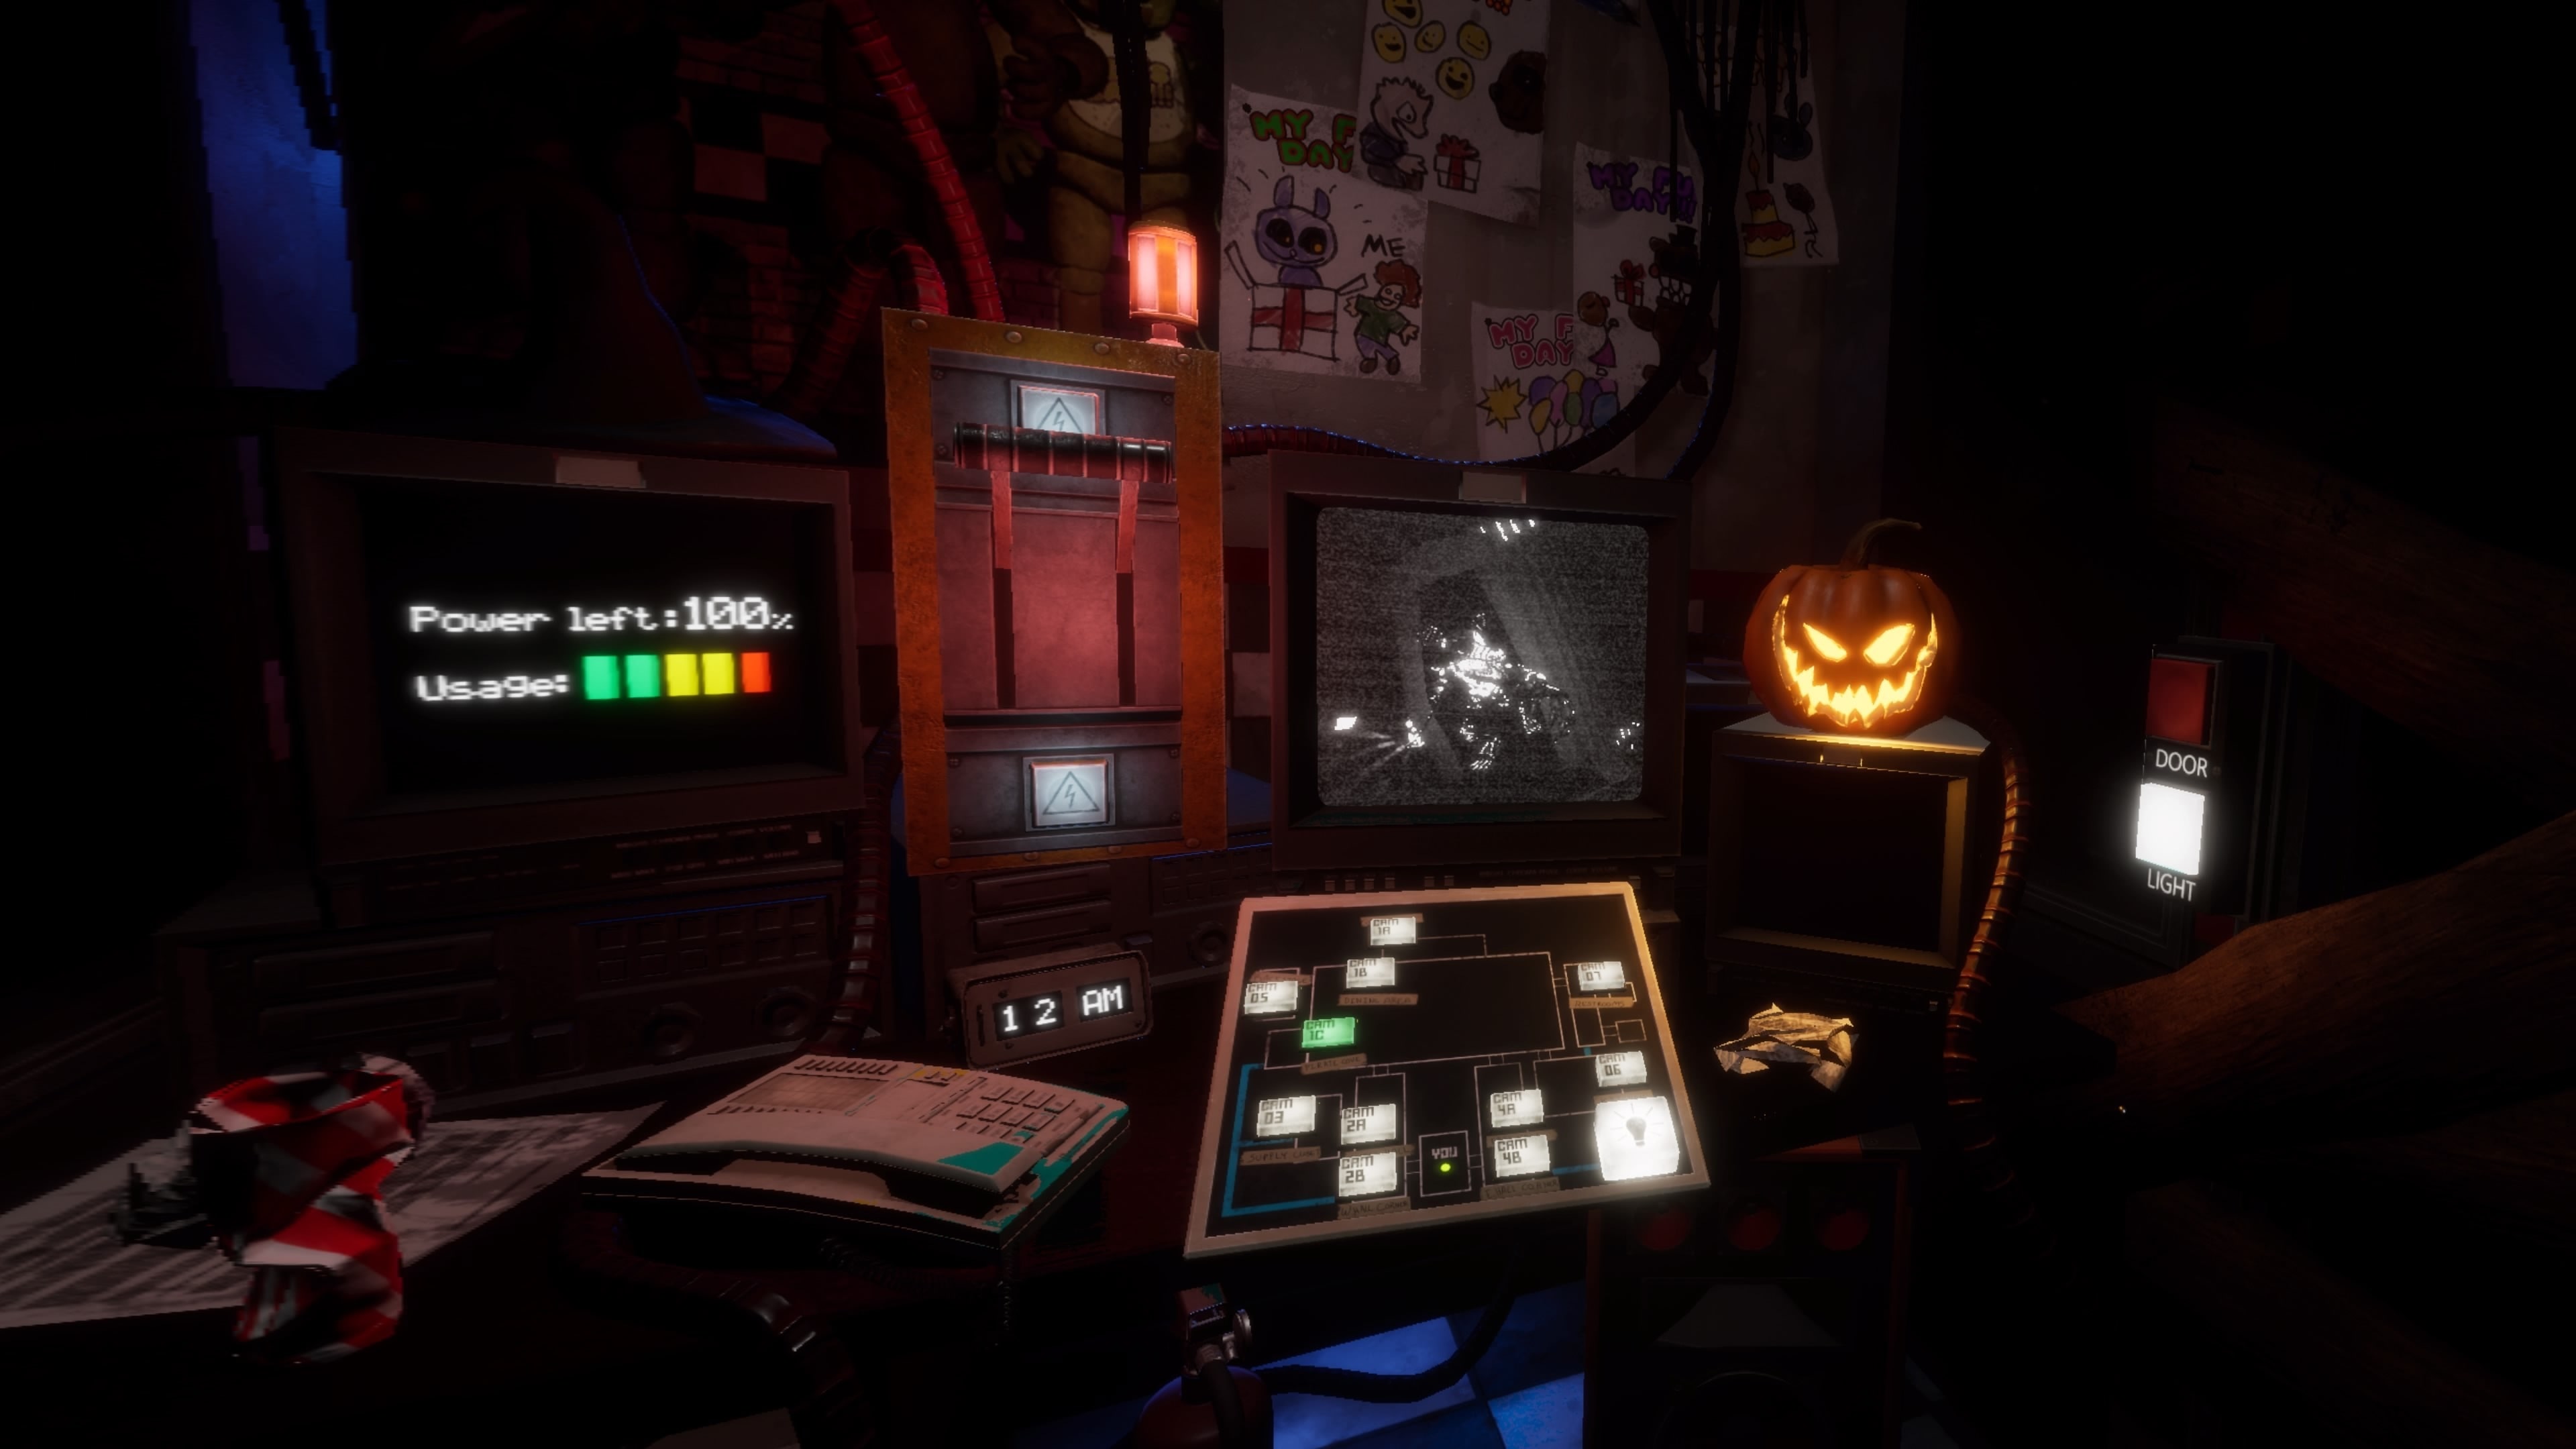 Five Nights At Freddy's VR - Help Wanted